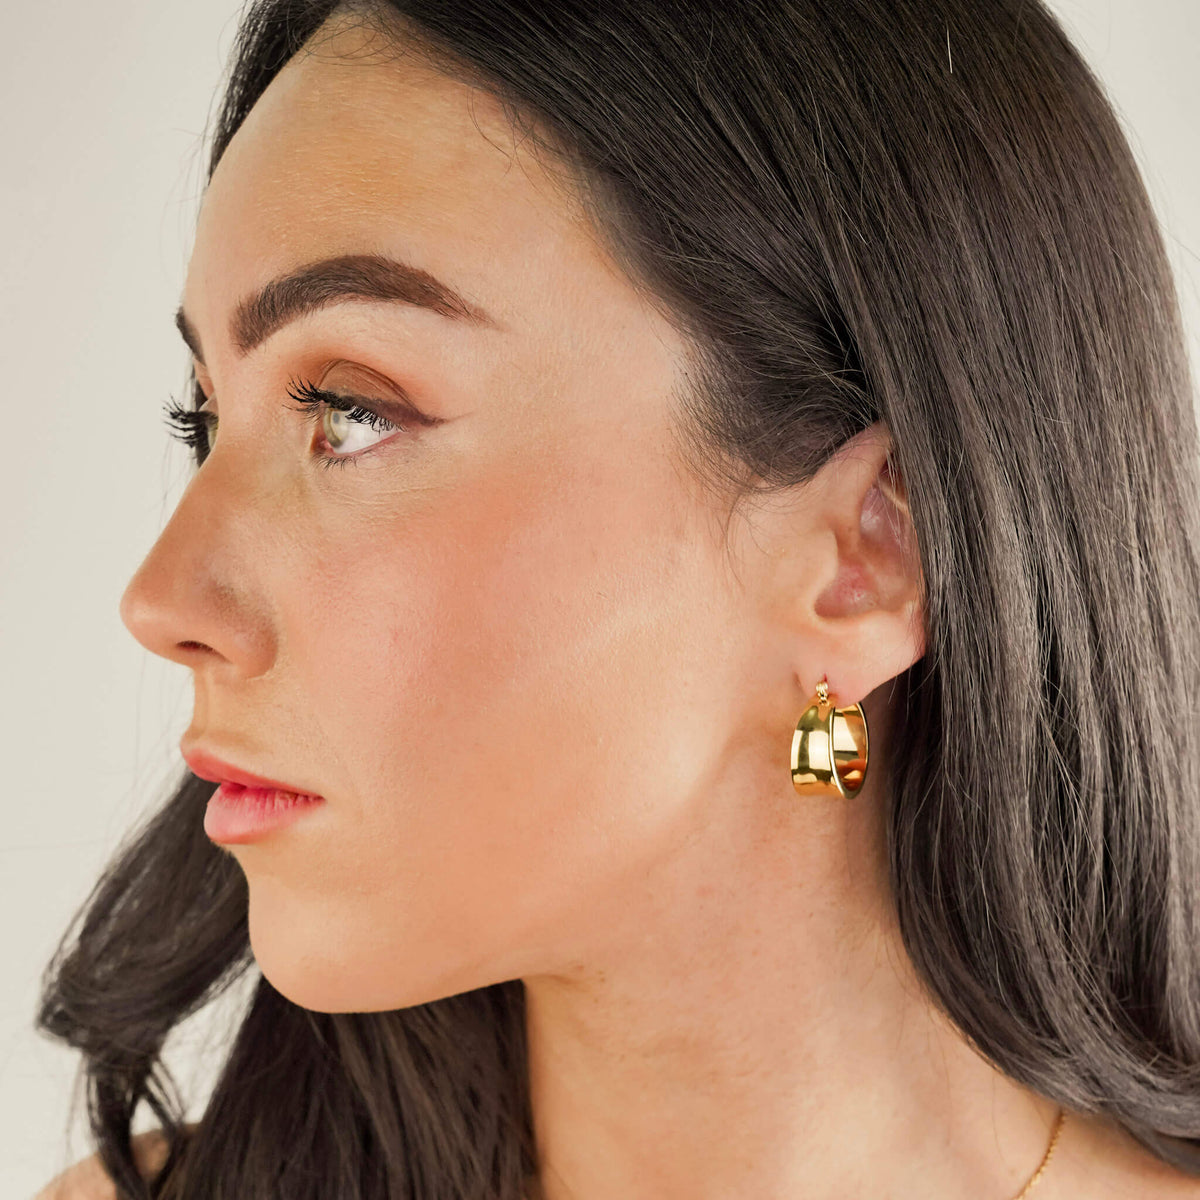 the model is wearing chunky statement earrings called the assertion hoops. They are lightweight and comfortable to wear, despite their commanding size. These earrings have a unique design that mirrors a cuff. 